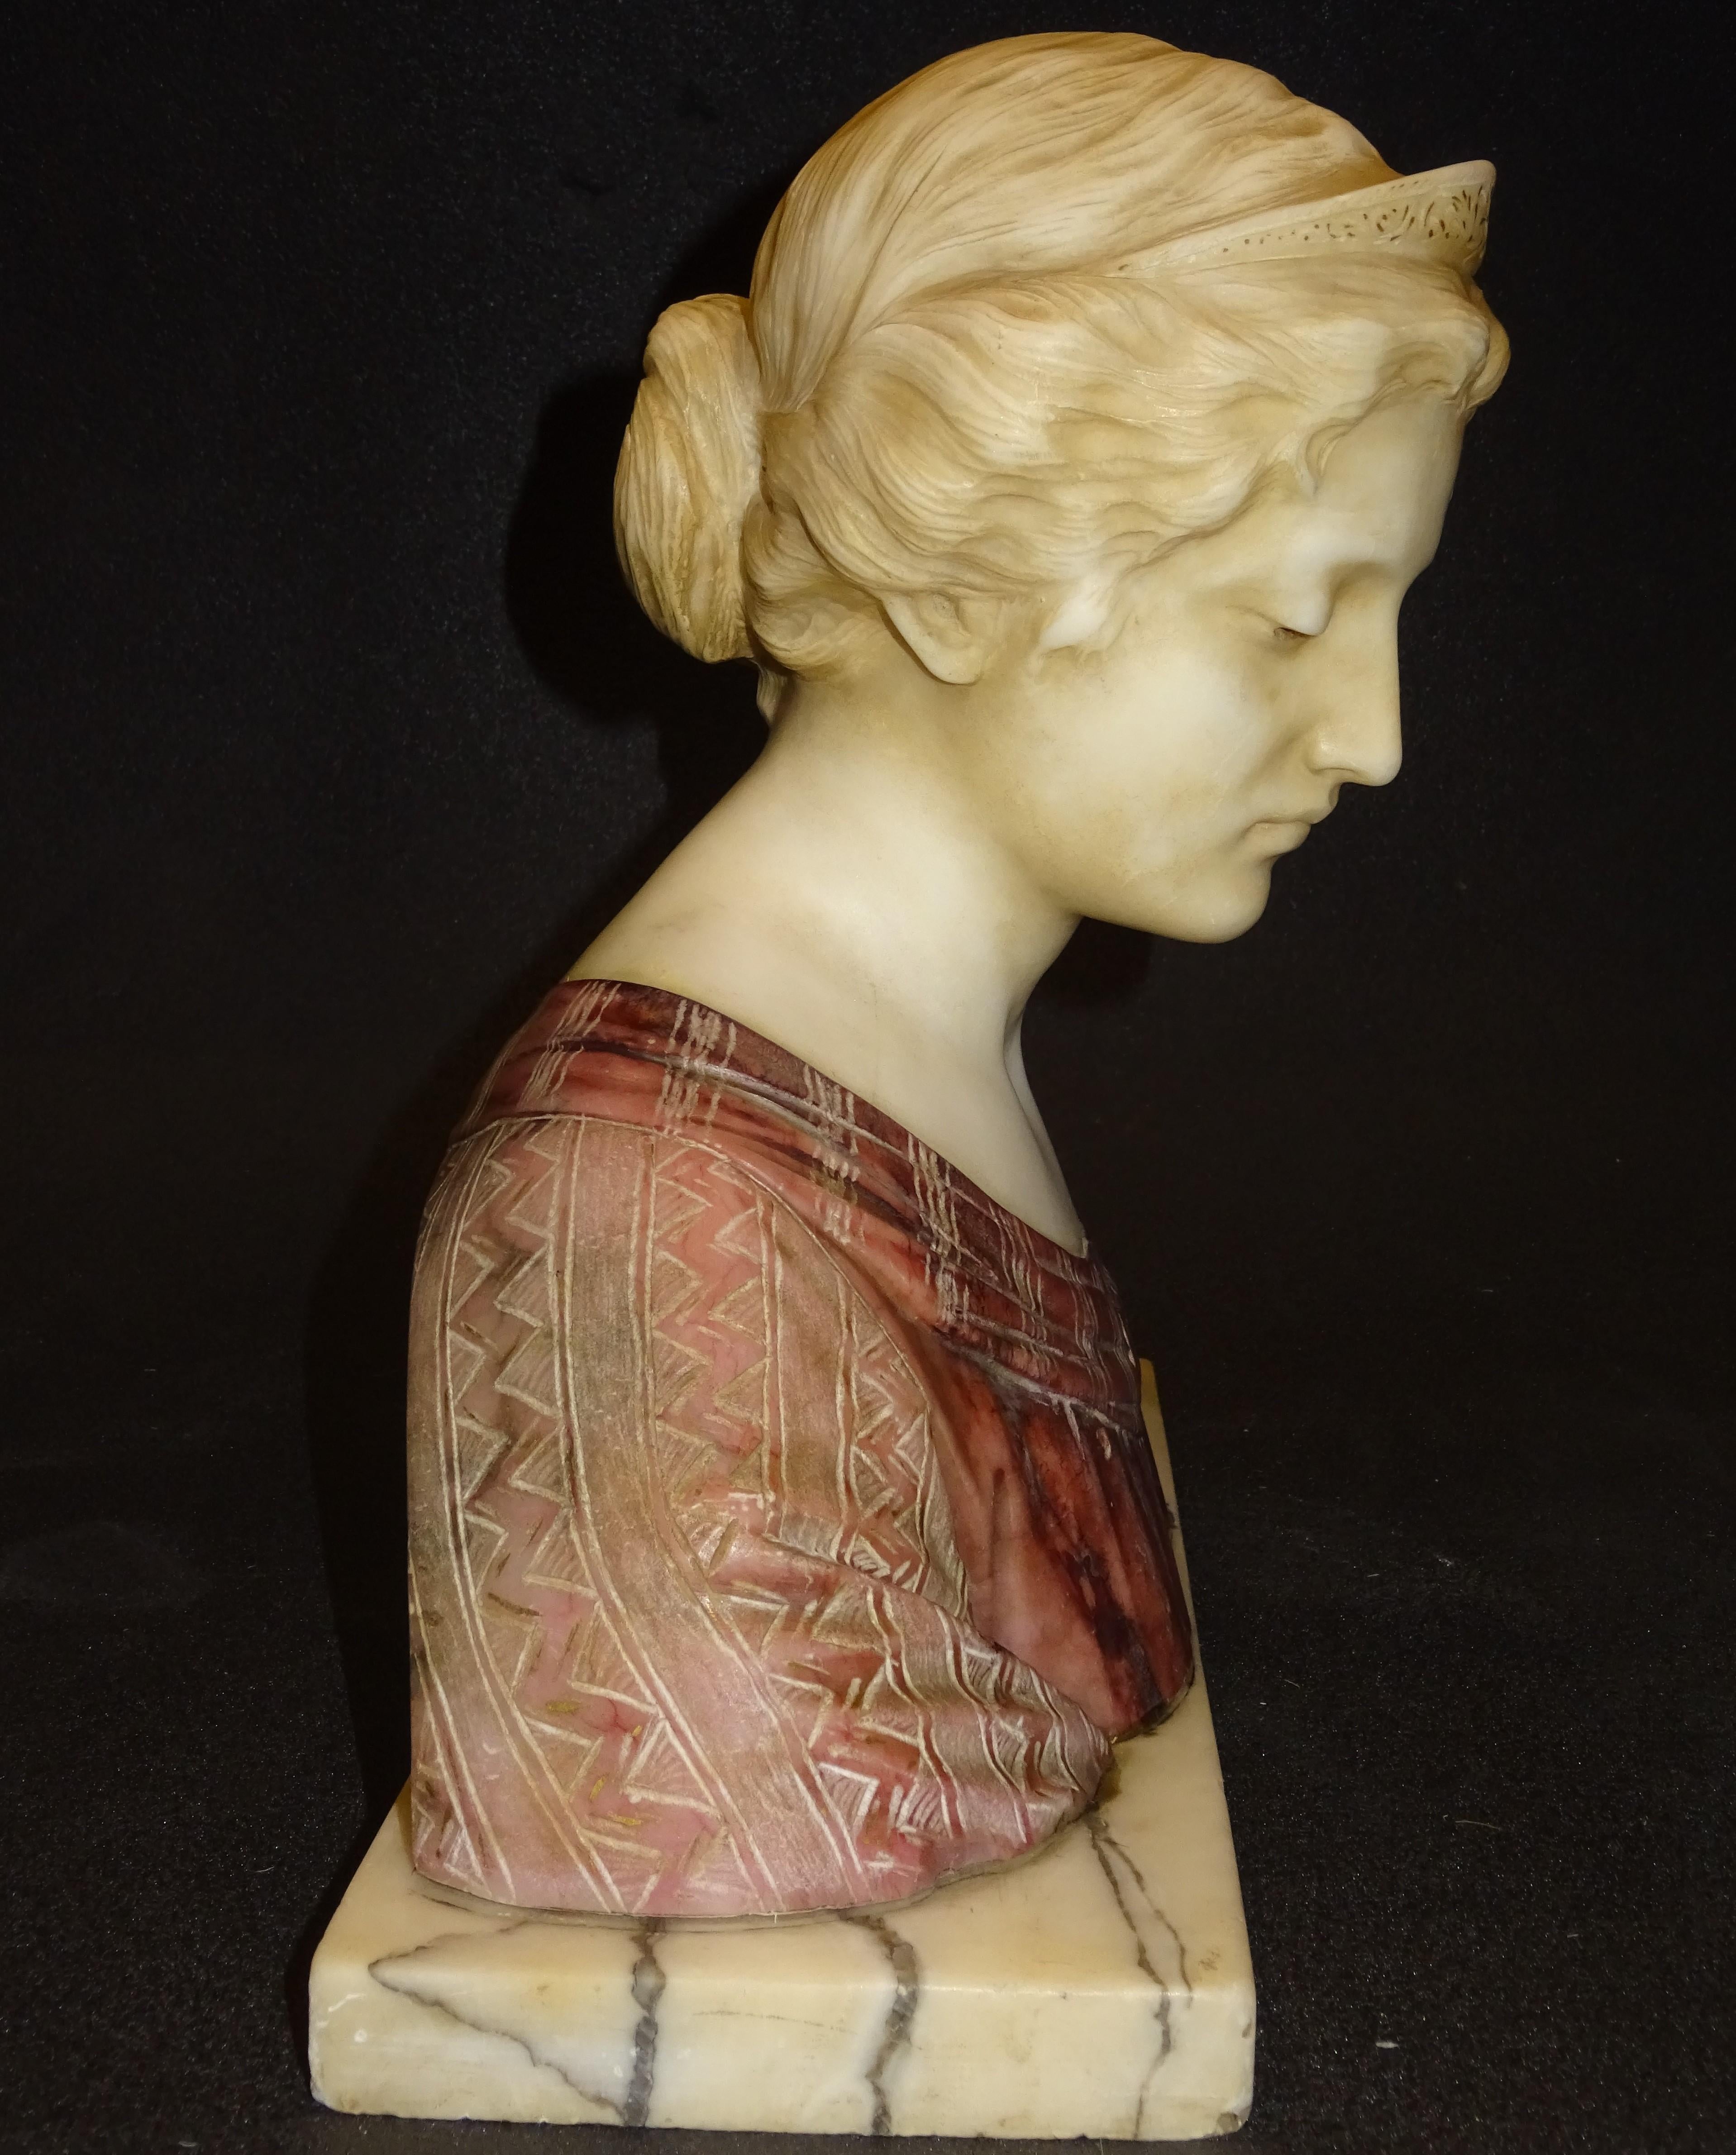 Magnificent bust in made combining two types of alabaster, one that shades broken white for the face and base of the piece and another with a reddish finish to contrast the dress that wears the figure. It appreciates the great elegance in the forms